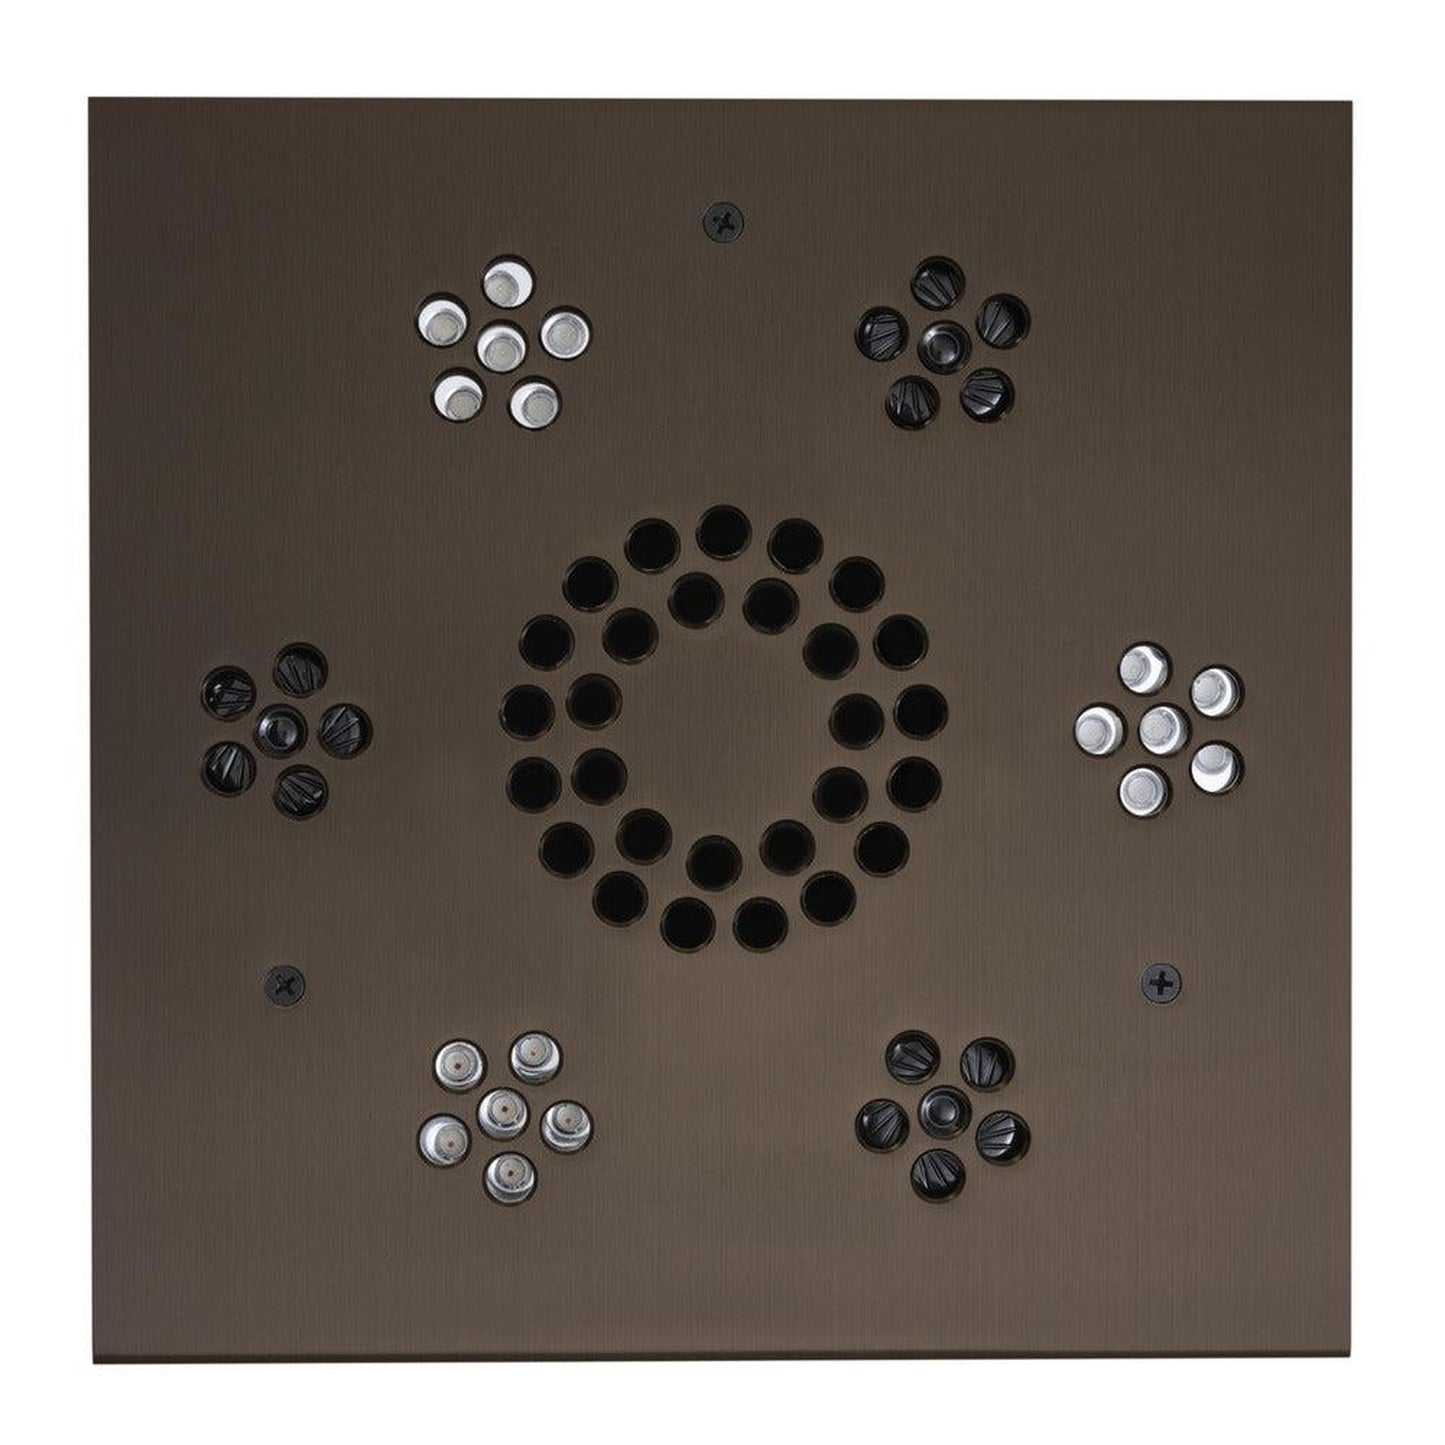 ThermaSol 10" x 10" Oil Rubbed Bronze Finish Square Serenity Essential Light and Music System Modern